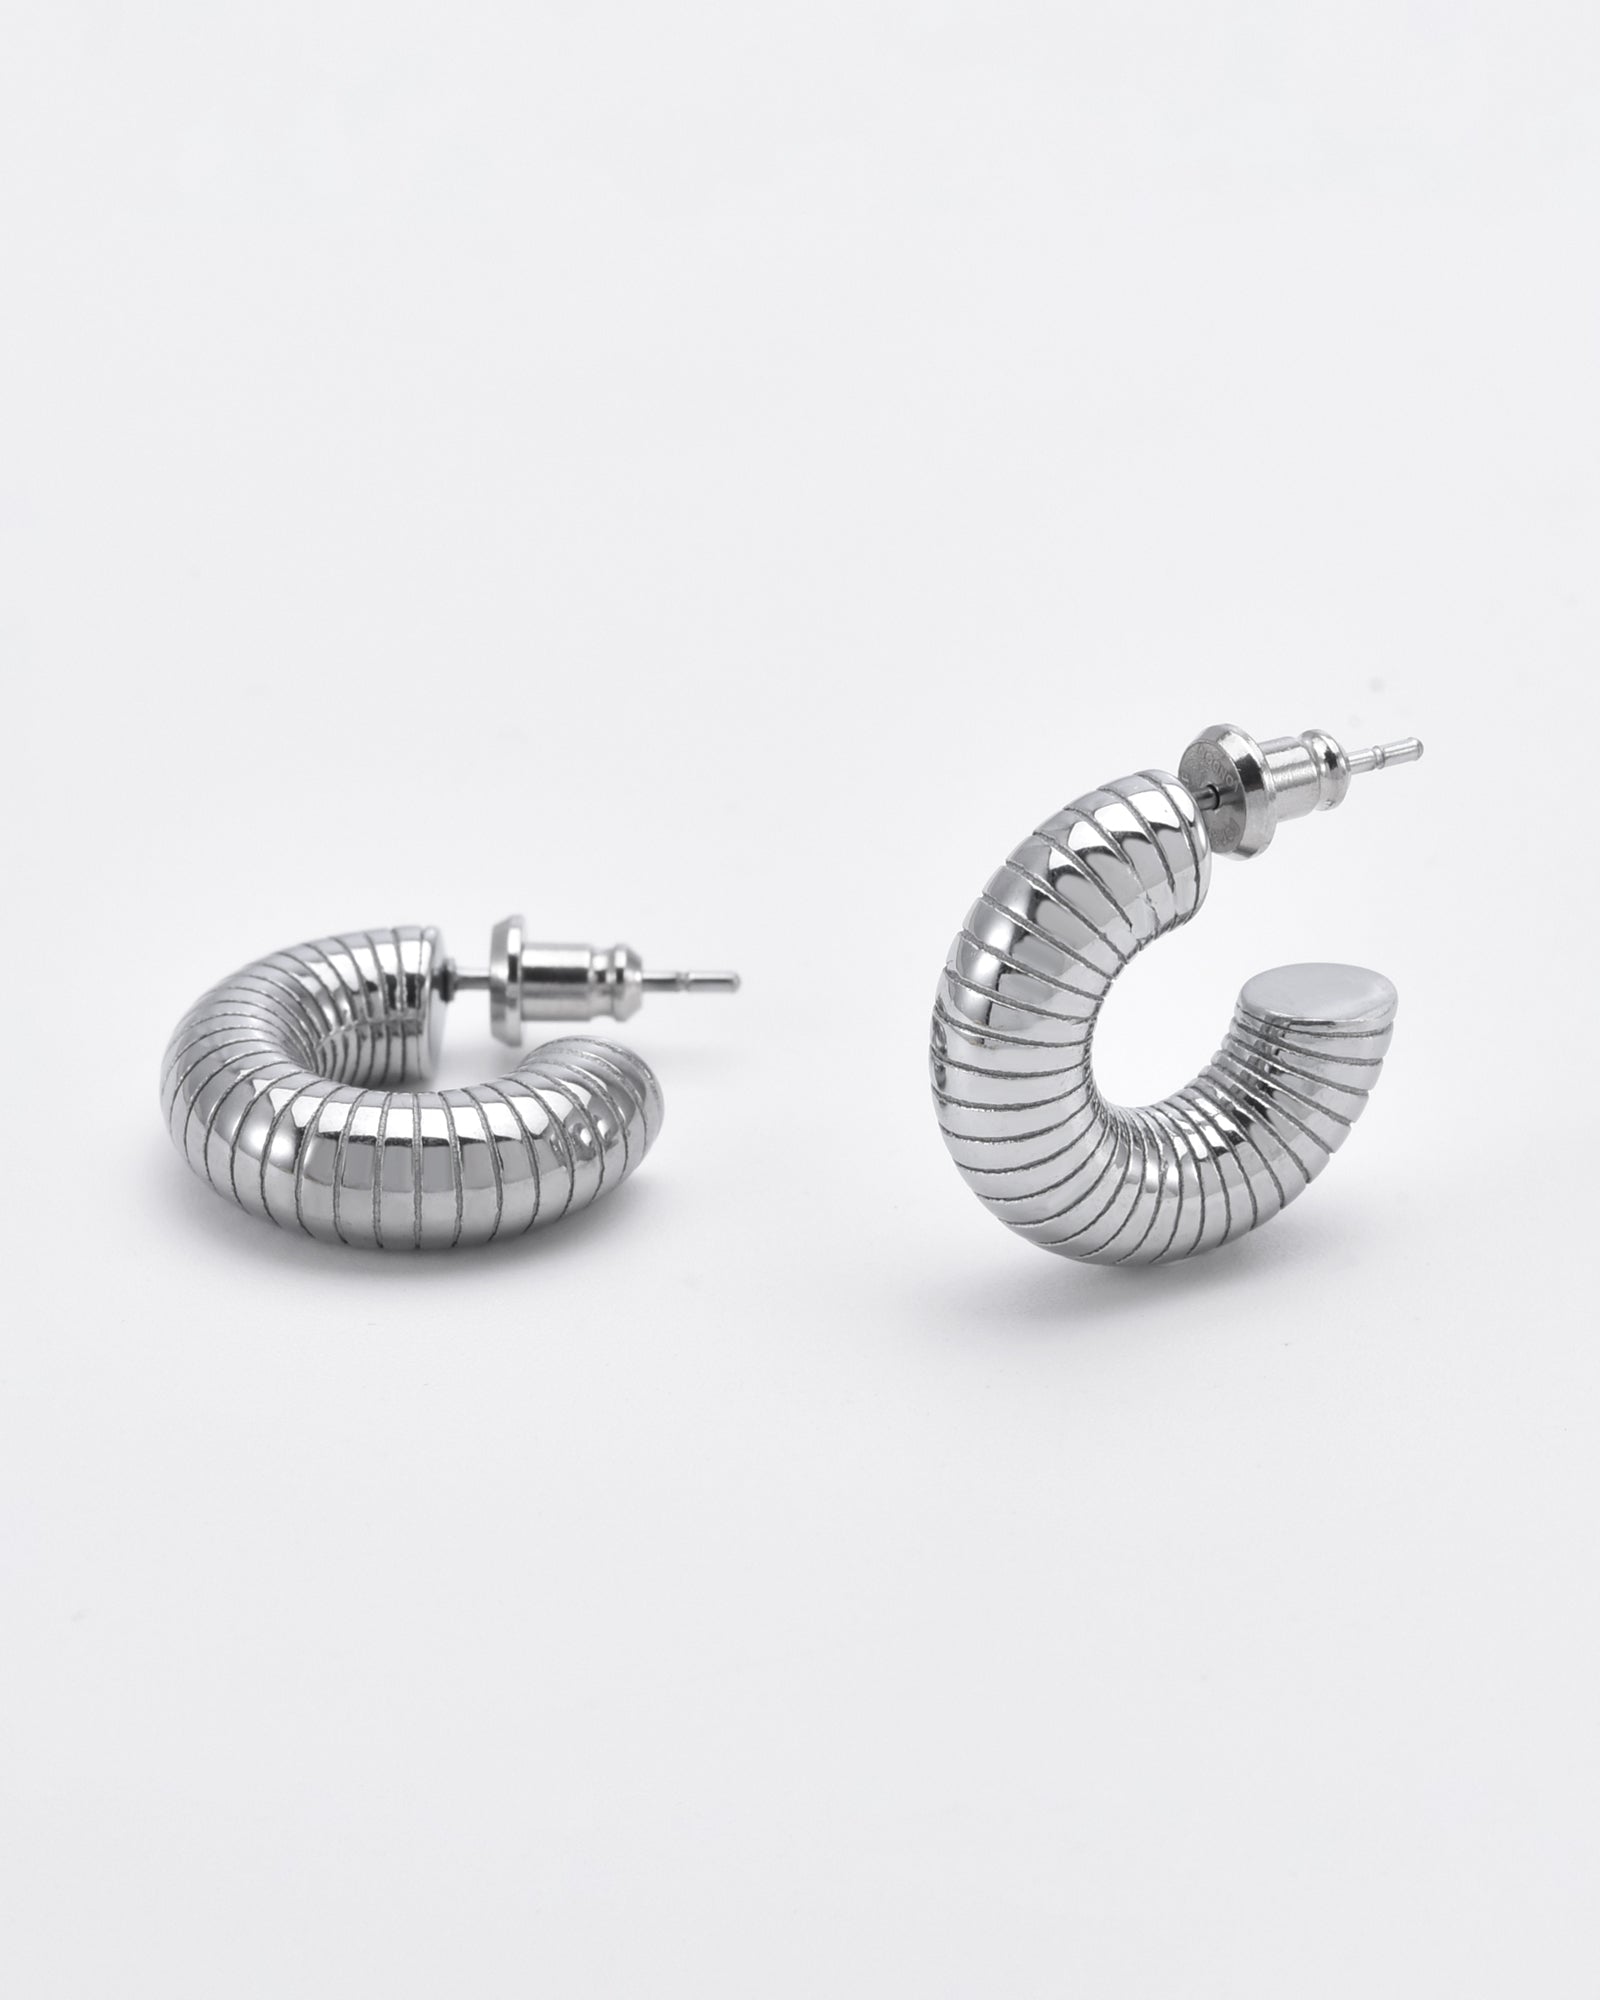 A pair of Daisy Earrings Silver by For Art&#39;s Sake® are shown against a plain white background. The earrings have a coiled design, resembling springs, and are slightly open at the ends where the earring posts and backs are visible. Hypoallergenic and sleek, the overall design is modern and minimalist.